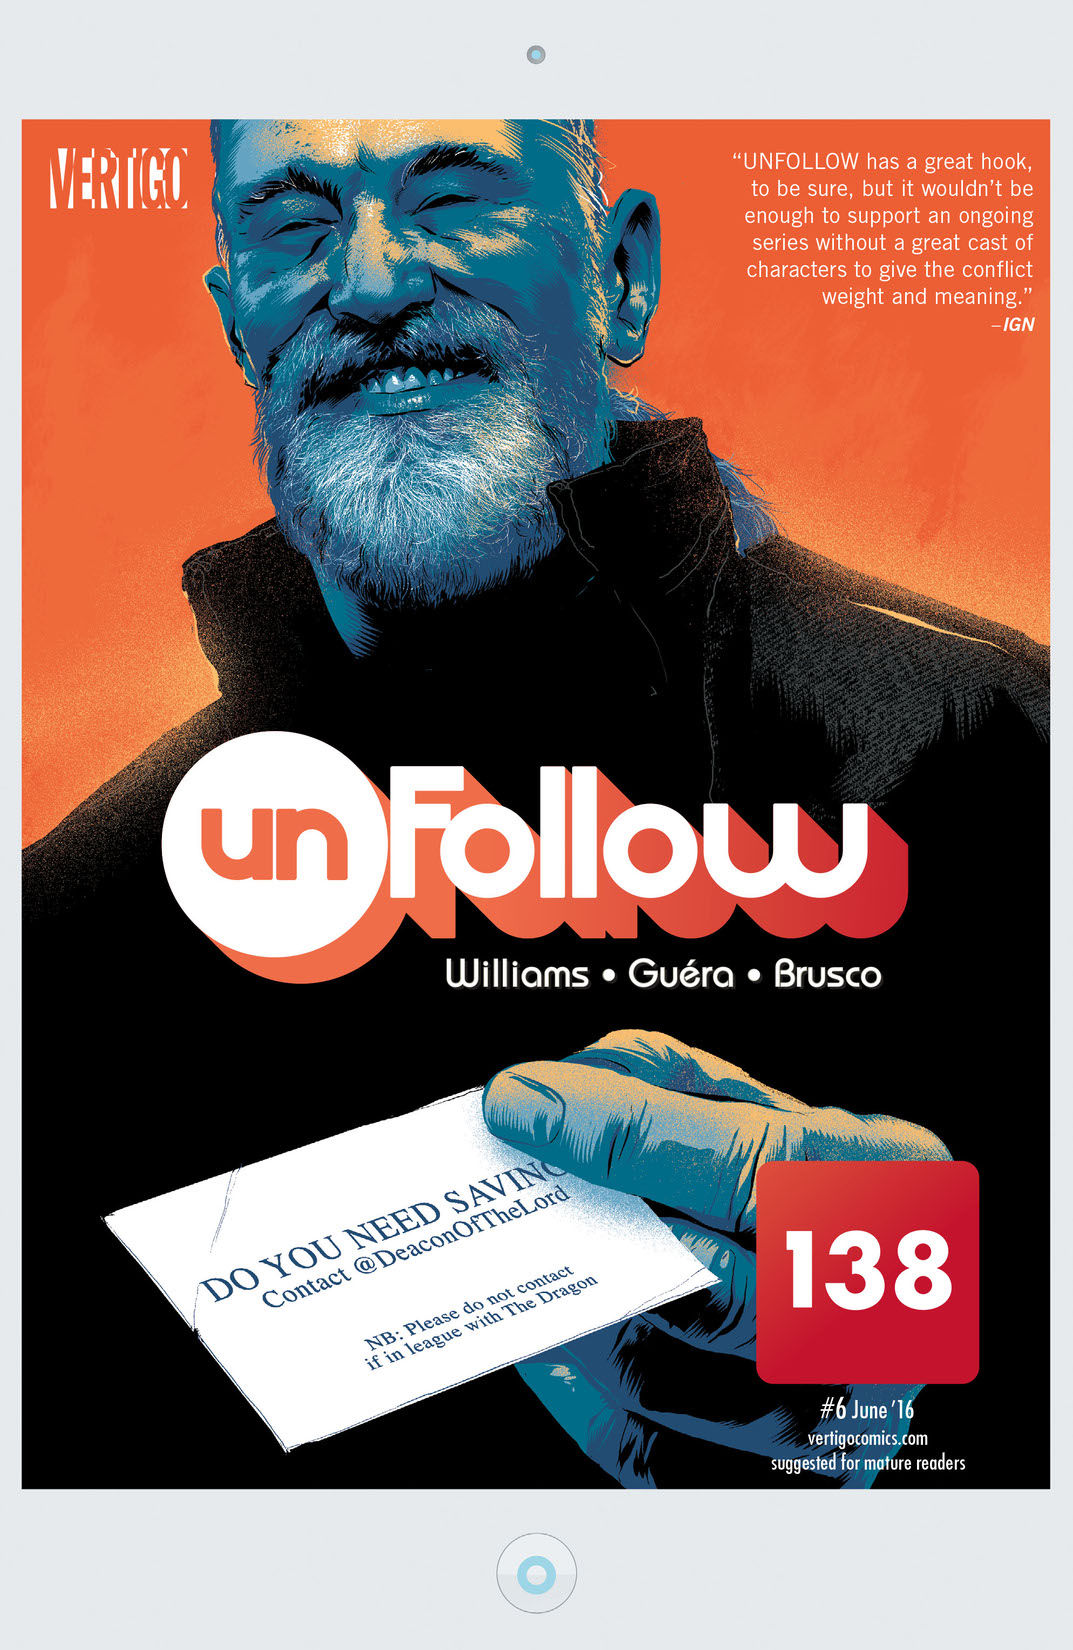 Unfollow #6 preview images